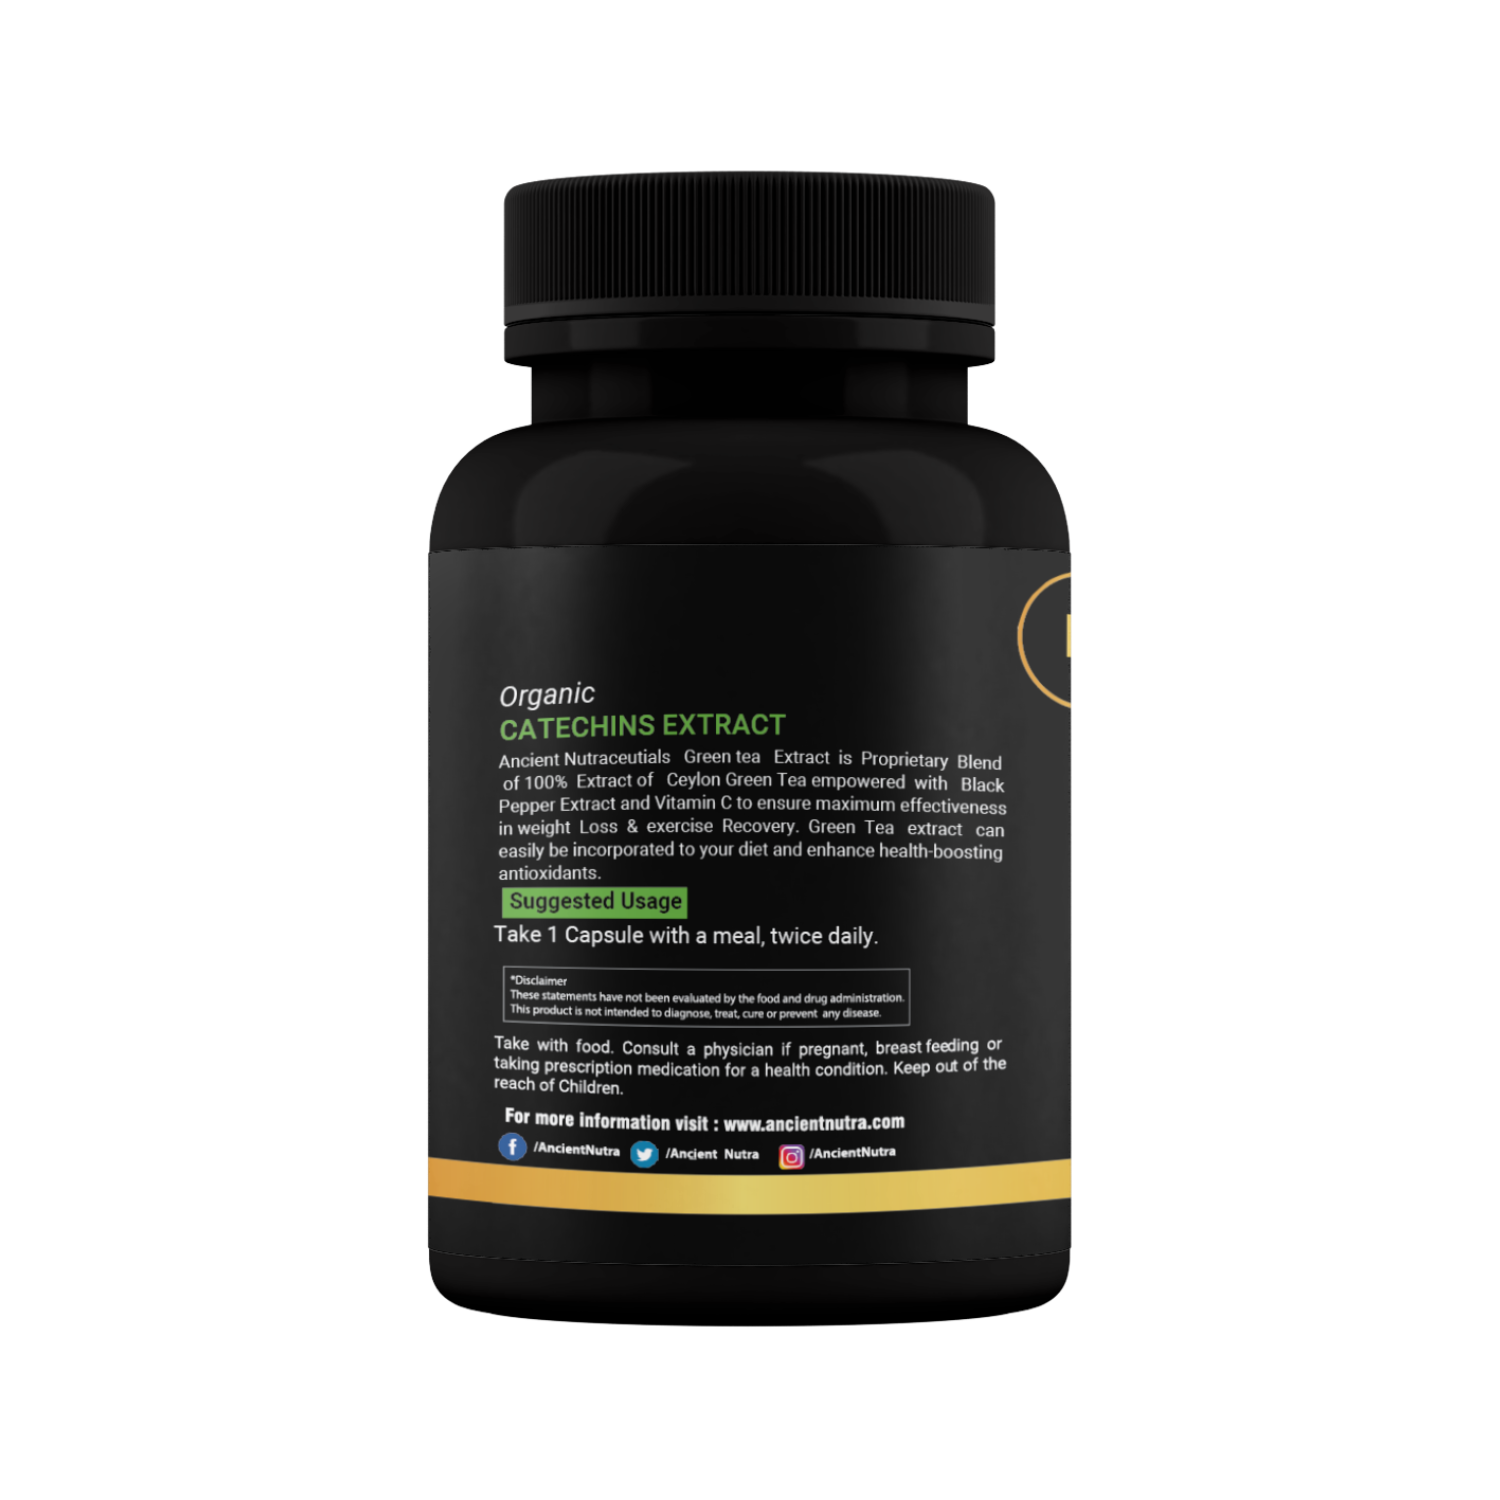 Green Tea Extract for Weight Loss Description (6171642724527)